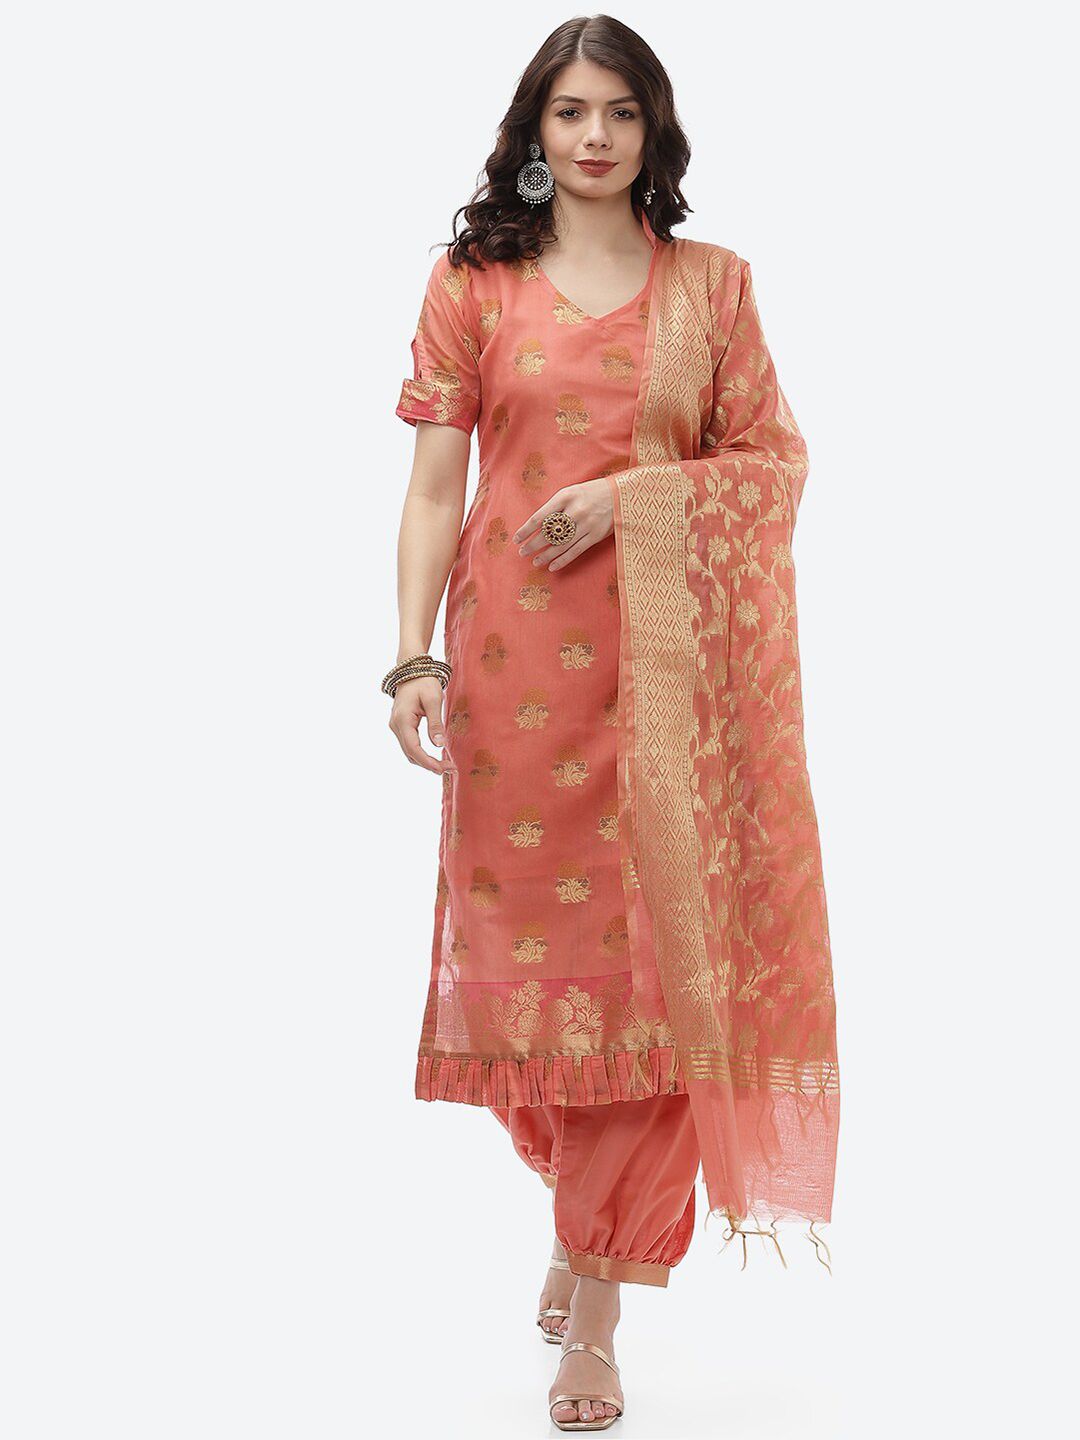 Biba Peach-Coloured & Gold-Toned Unstitched Dress Material Price in India